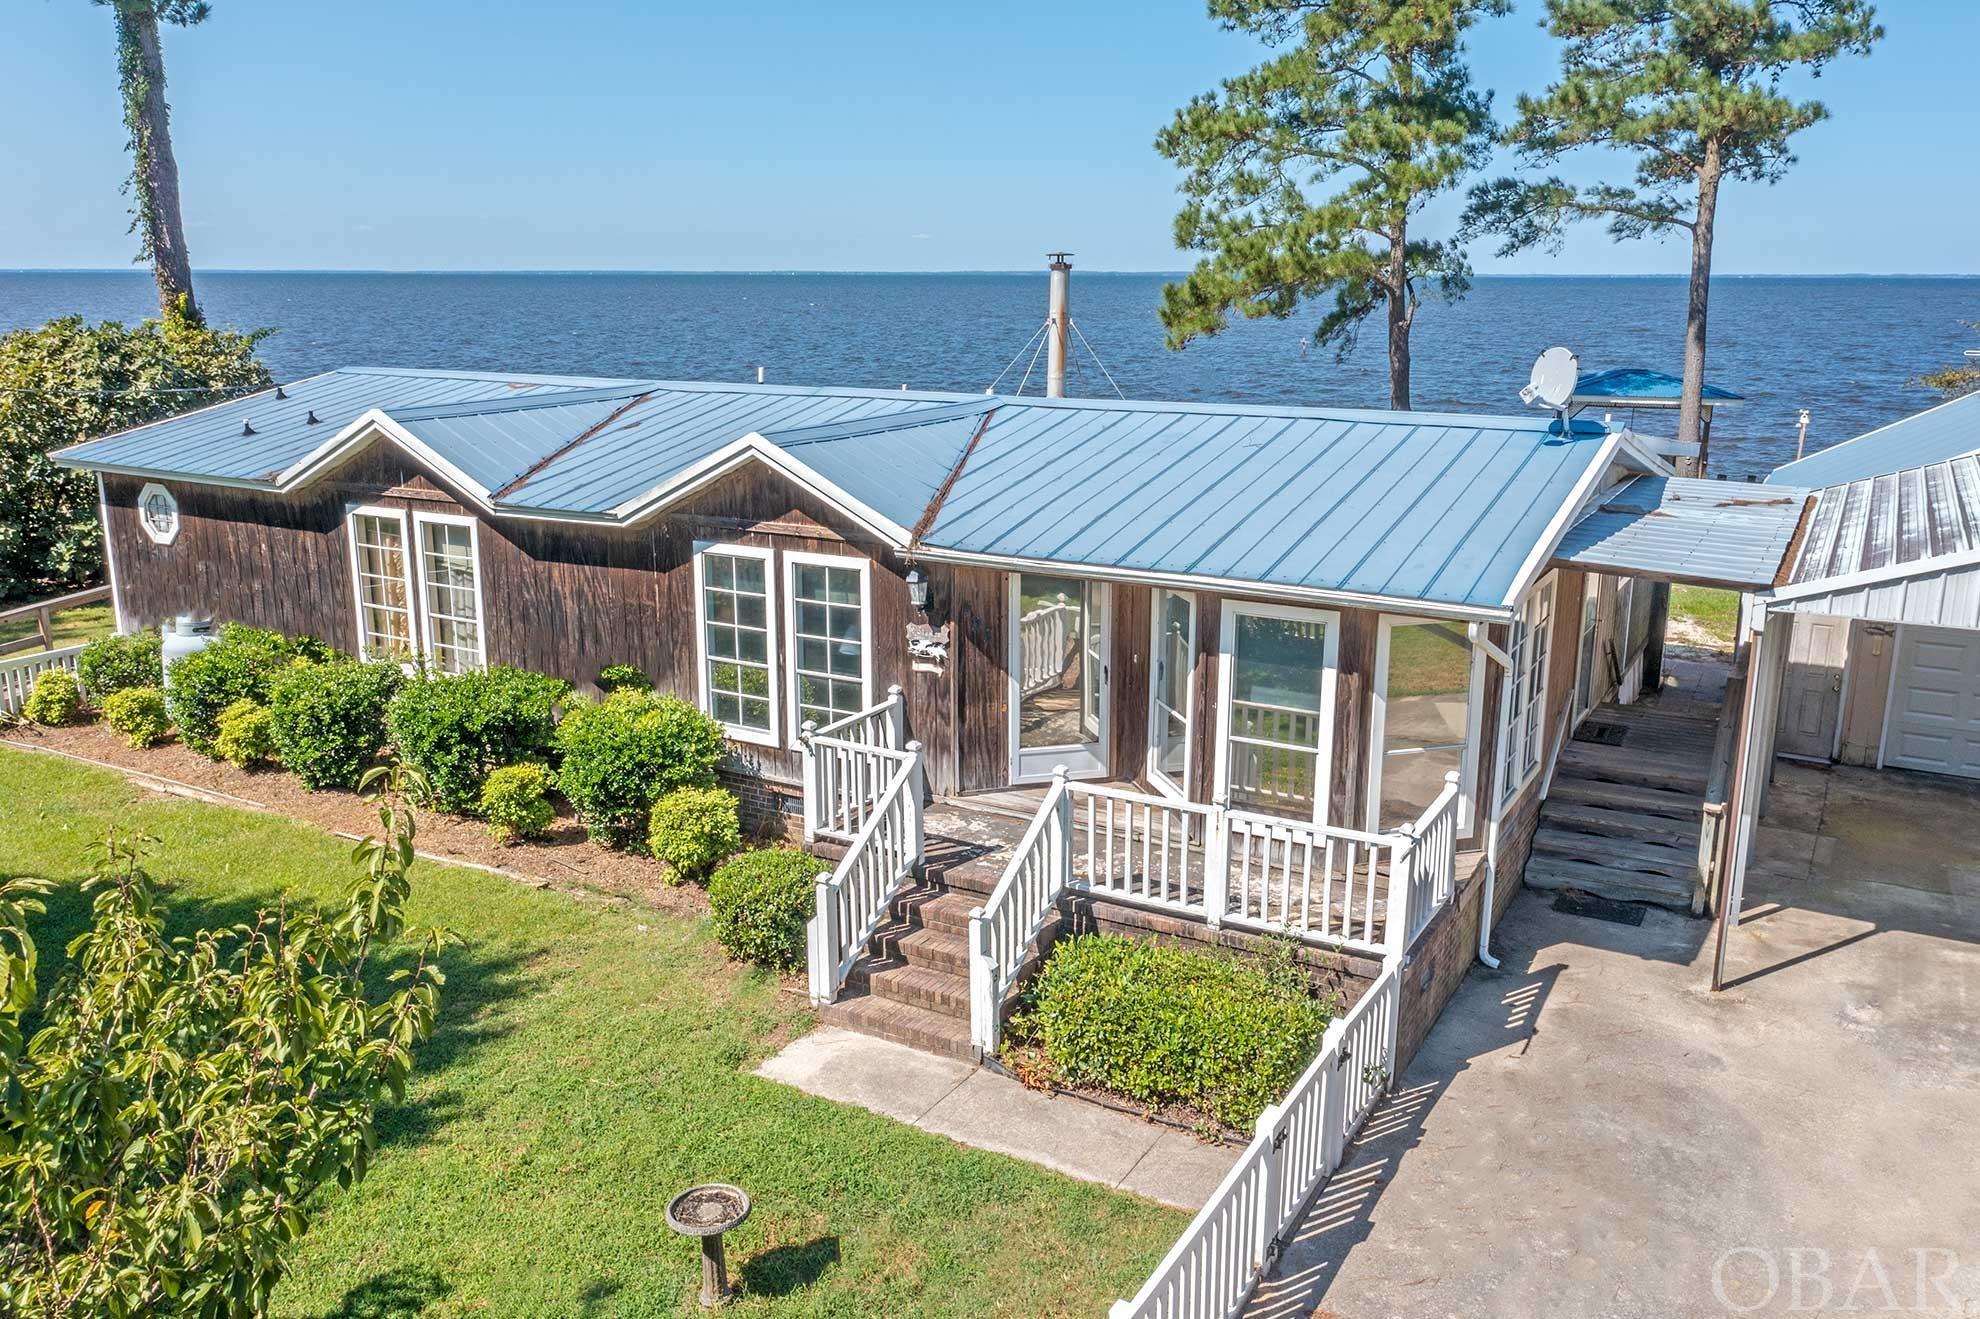 Panoramic waterfront views located on the Albemarle Sound in X-Flood Zone! Beautiful location for year round living or weekend getaways. This three bedroom, two bath home is nestled on a half-acre lot, perfect for just relaxing or a mini waterfront homestead far away from the hustle and bustle. Enjoy an open concept design inside this ranch style double-wide manufactured home. The kitchen has Corian type counter tops, stainless steel appliances, a breakfast bar as well as a separate dining room with a bay window. The living room features a vaulted ceiling which opens onto the covered deck with water views, a fireplace, a propane heater and a wood burning stove. Large master bedroom has a private covered deck overlooking the sound with a wheelchair accessible ramp. Master bathroom has an accessible shower, floor to ceiling storage and a double vanity. Property features a detached garage, a huge carport and two bay pole barn, all with blue metal roofing. Also a chicken coop, garden bed, outside fish cleaning sink, a mature fig bush and grape vine that were full of fruit this summer. Separate power pole for motorhome set up; possibly set up an Airbnb for extra income potential. The bulkhead is approx. 175ft, vinyl fencing in the front yard and covered decking across the back of the home with amazing water views. A waterfront gazebo with a wooden swing for fishing, launching your kayak, or just enjoying the vistas. Affordable waterfront living about an hour from the Outer Banks, and 30 minutes to Manteo. This area is an outdoorsy paradise with fishing, boating and abundant wildlife! The historic, waterfront town of Columbia is quaint with a small marina, shopping, restaurants, and cultural arts with Pocosin Arts School of Fine Craft as well as Pocosin Lakes Wildlife Refuge.  Come make this your waterfront dream home!